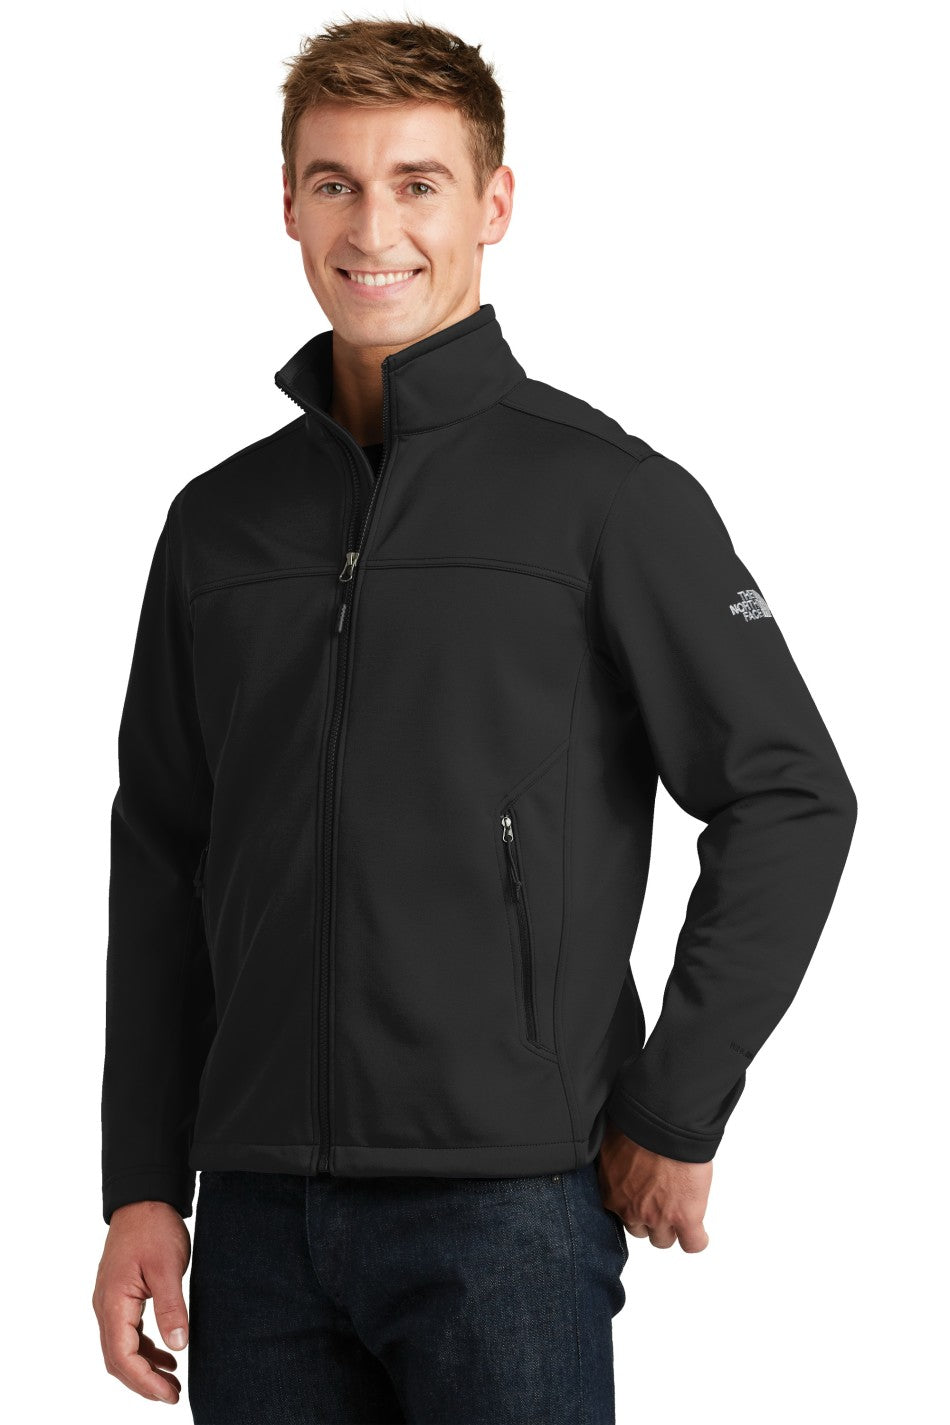 the north face soft shell jacket